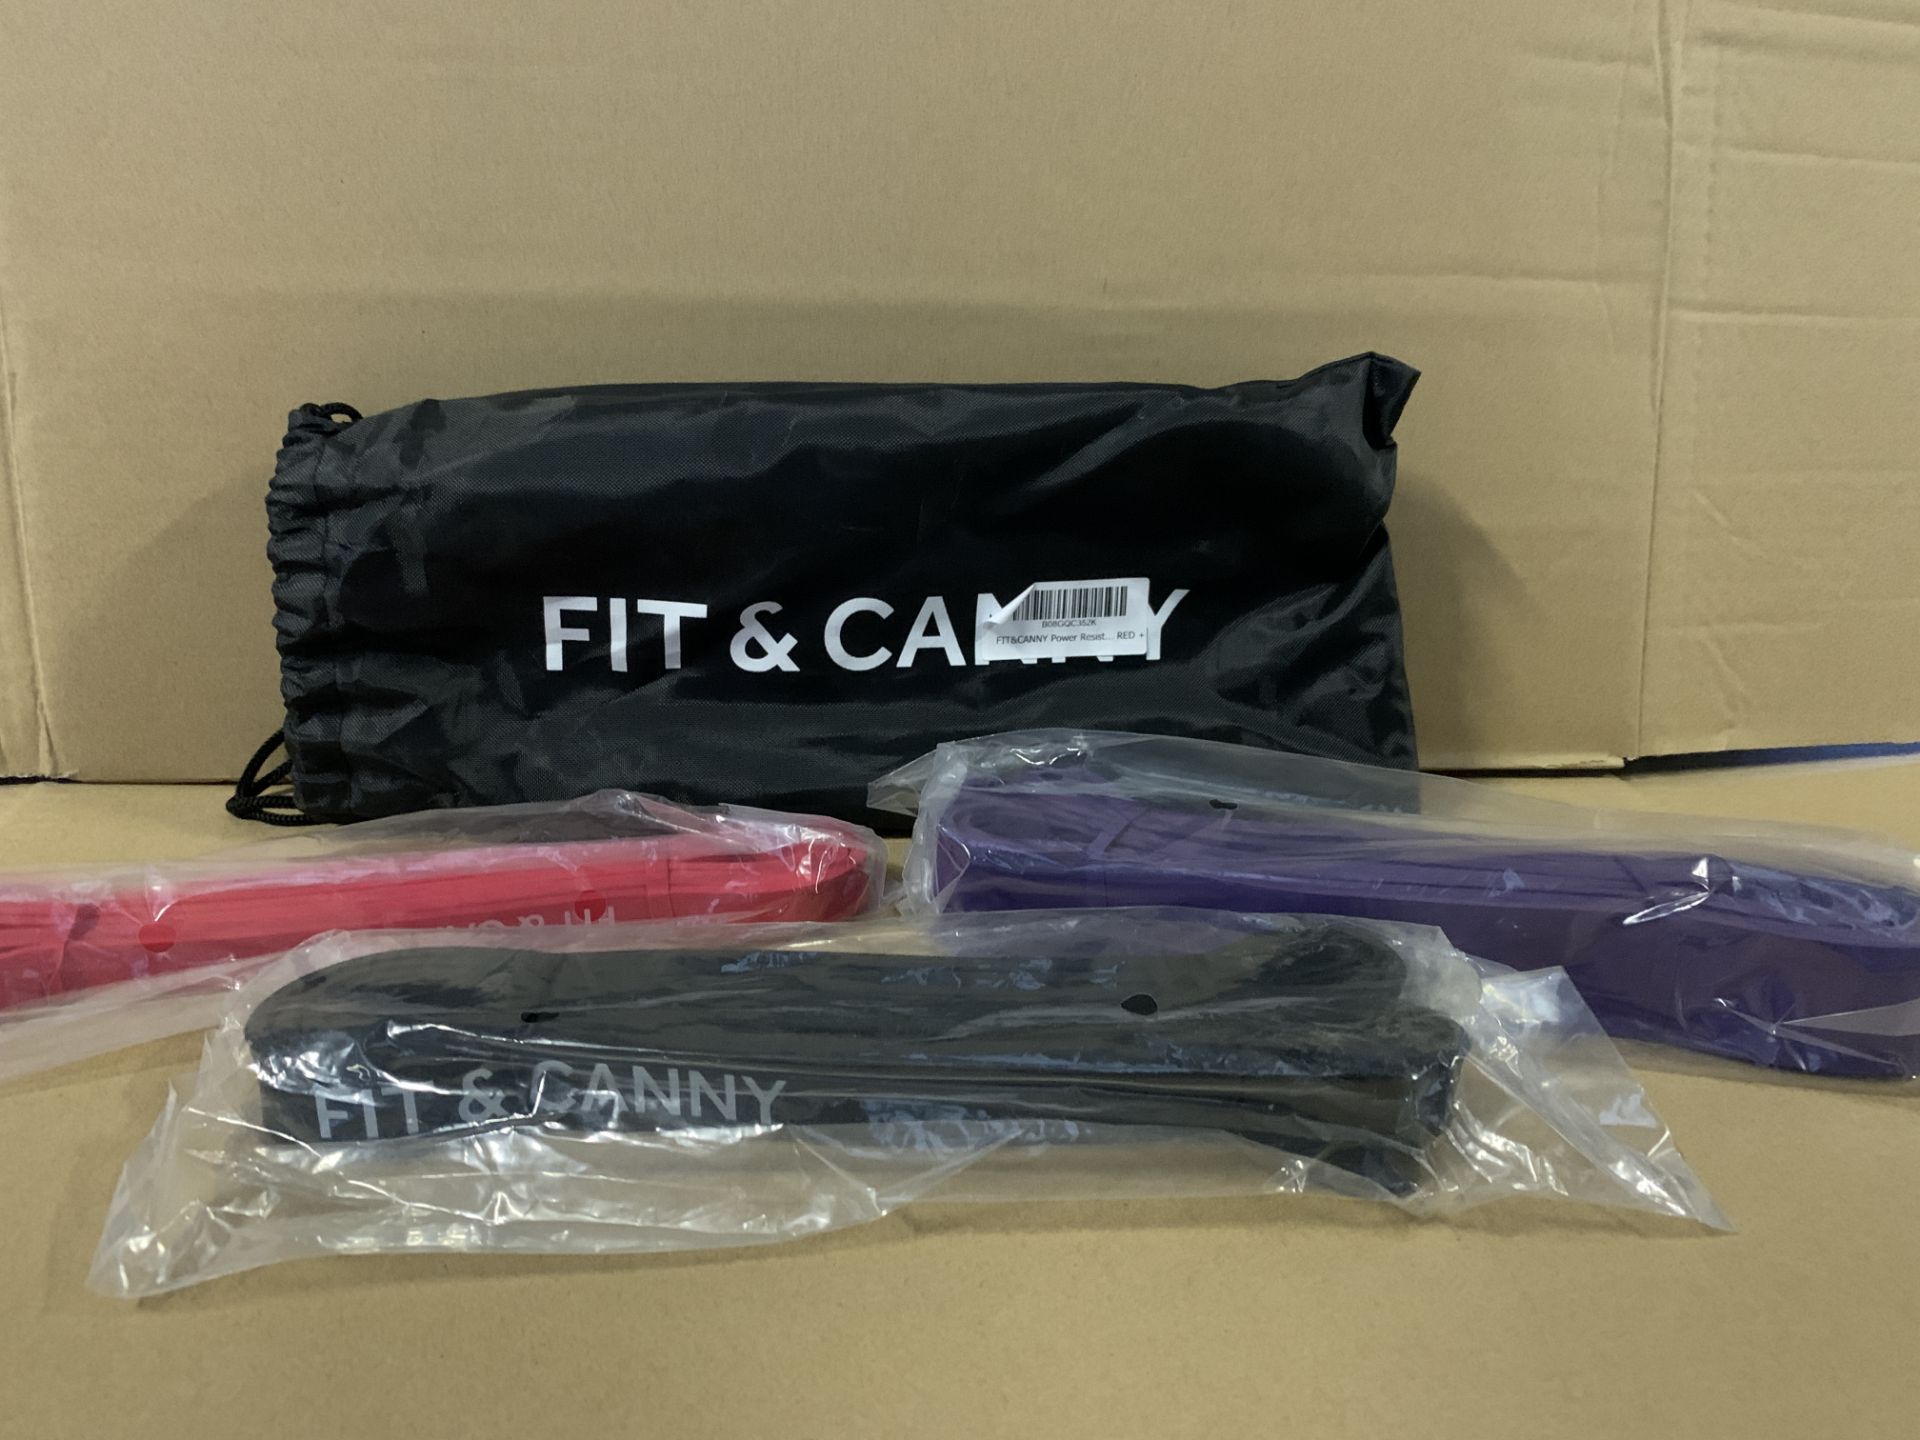 24 X BRAND NEW FIT AND CANNY RESISTANCE BANDS (COLOURS MAY VARY) S1-2